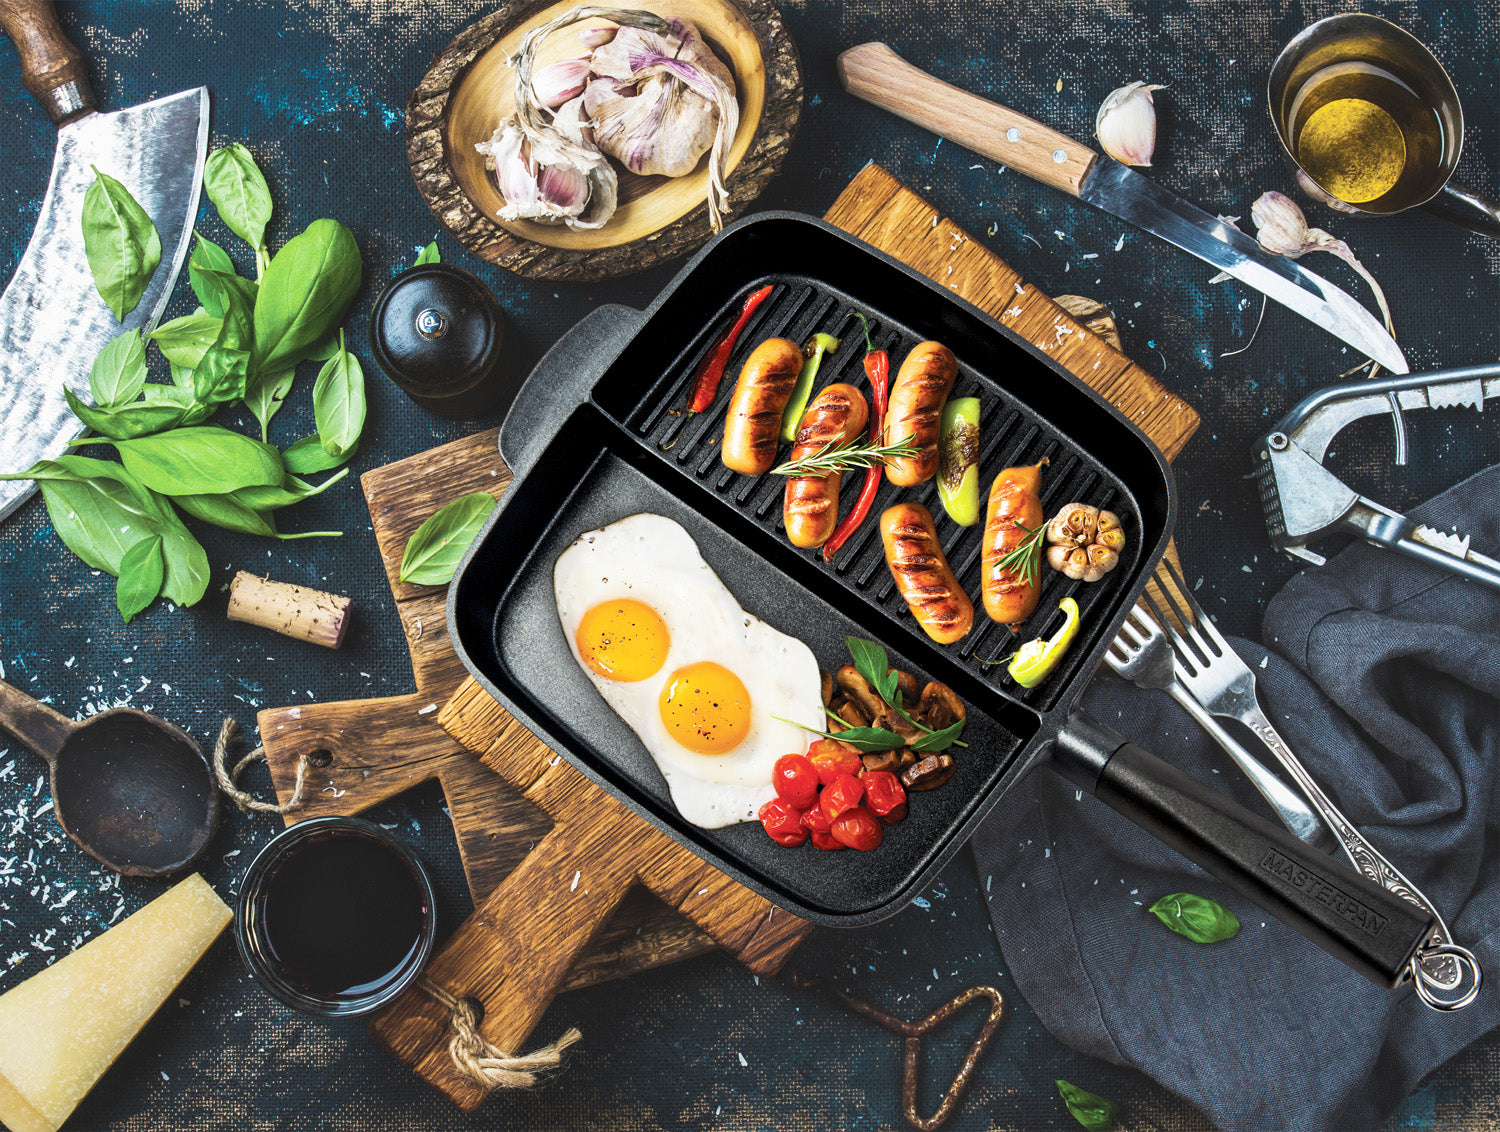 MasterPan Non-Stick 15 in. Divided Grill/Fry/Oven Meal Skillet